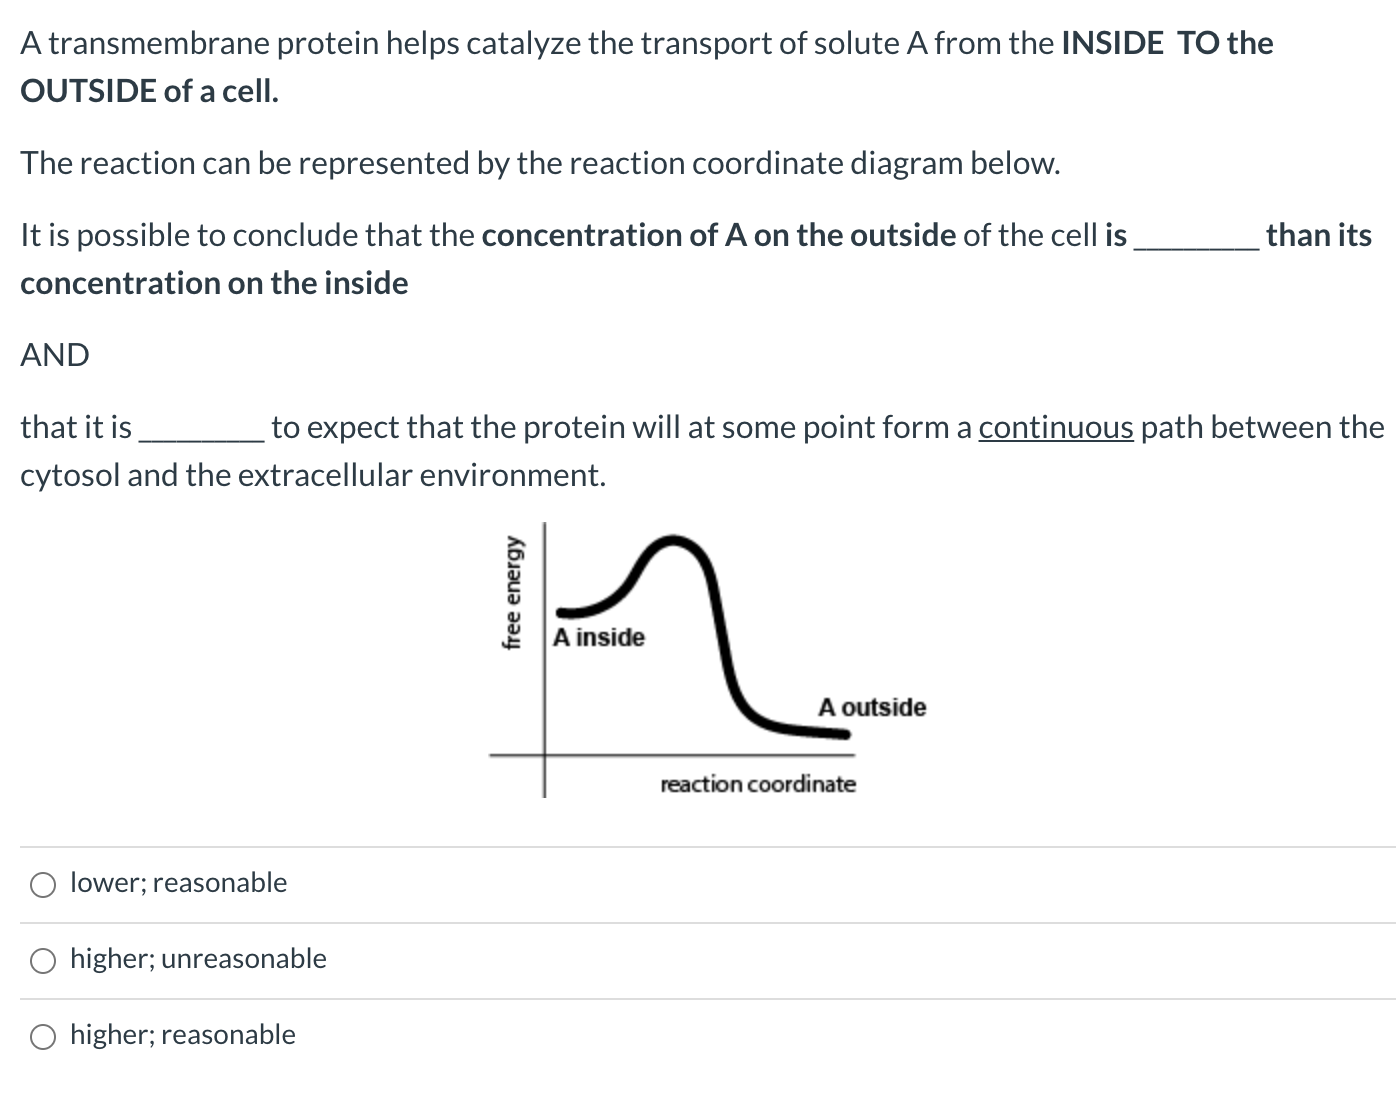 A transmembrane protein helps catalyze the transport of solute A from the INSIDE TO the
OUTSIDE of a cell.
The reaction can be represented by the reaction coordinate diagram below.
It is possible to conclude that the concentration of A on the outside of the cell is
than its
concentration on the inside
AND
that it is_ to expect that the protein will at some point form a continuous path between th
cytosol and the extracellular environment.
A inside
A outside
reaction coordinate
O lower; reasonable
O higher; unreasonable
O higher; reasonable
free energy
